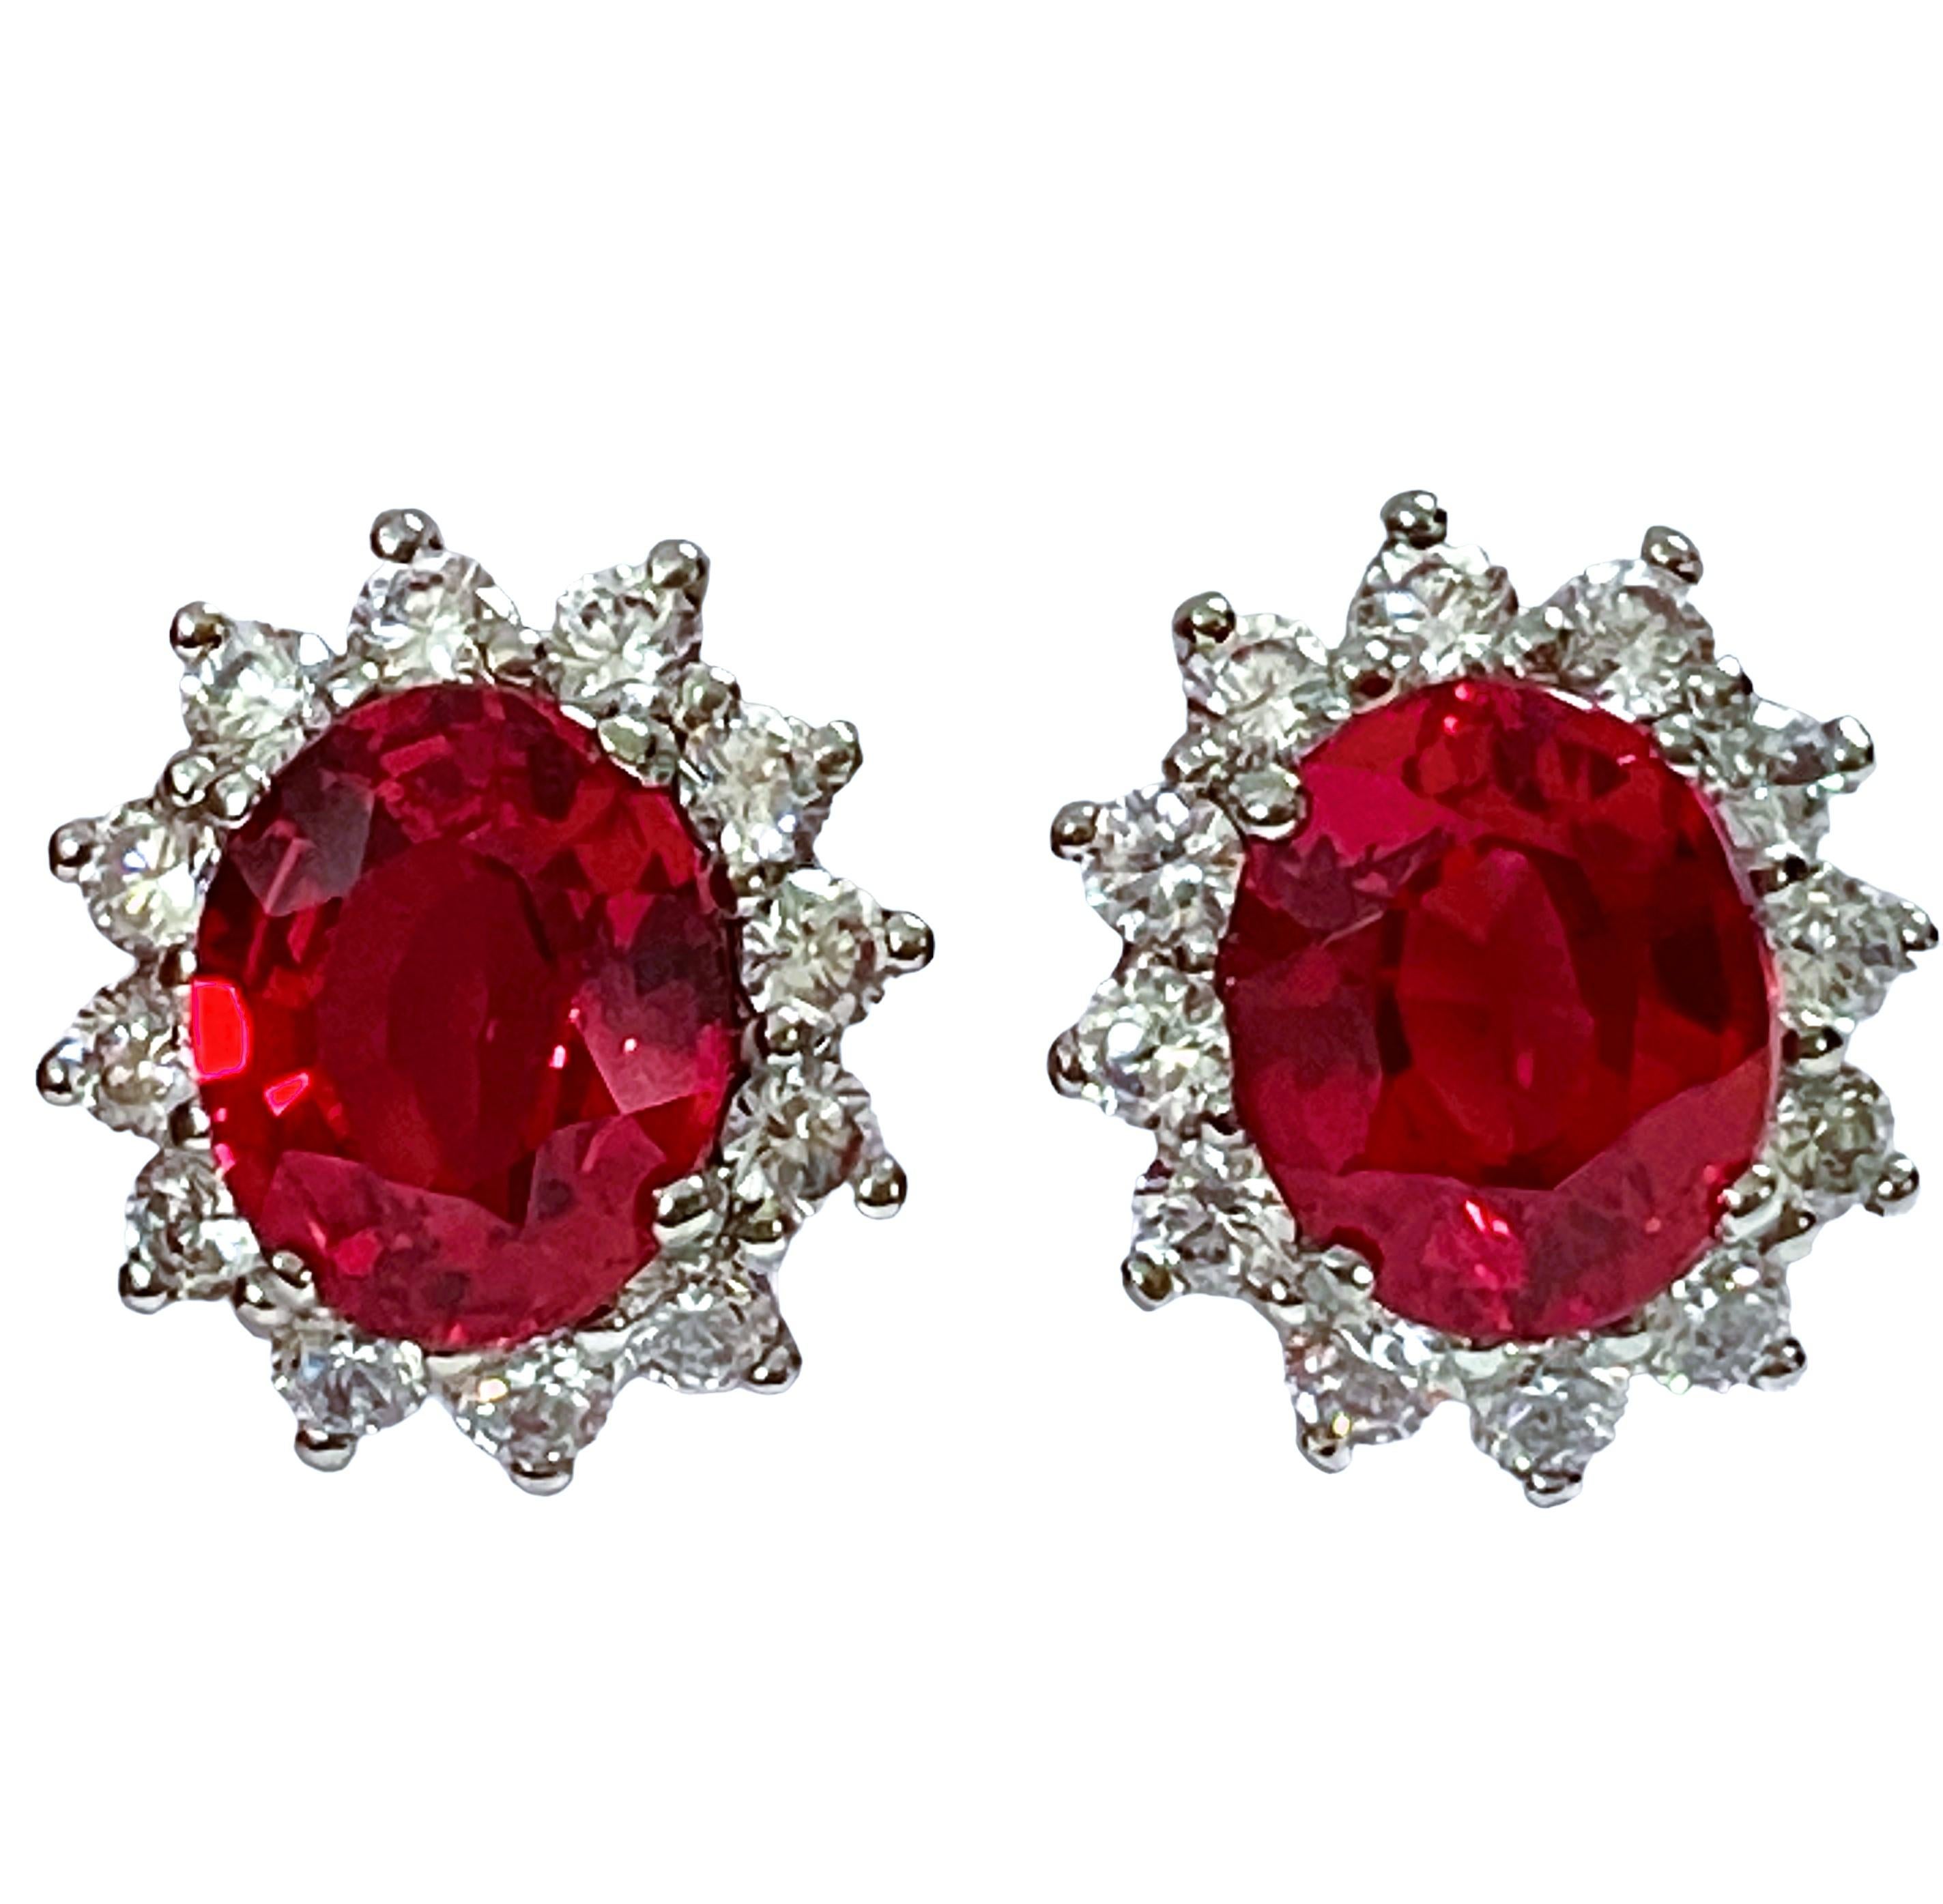 Oval Cut New African IF 12.7 Carat Padparadscha & White Sapphire Sterling Earrings